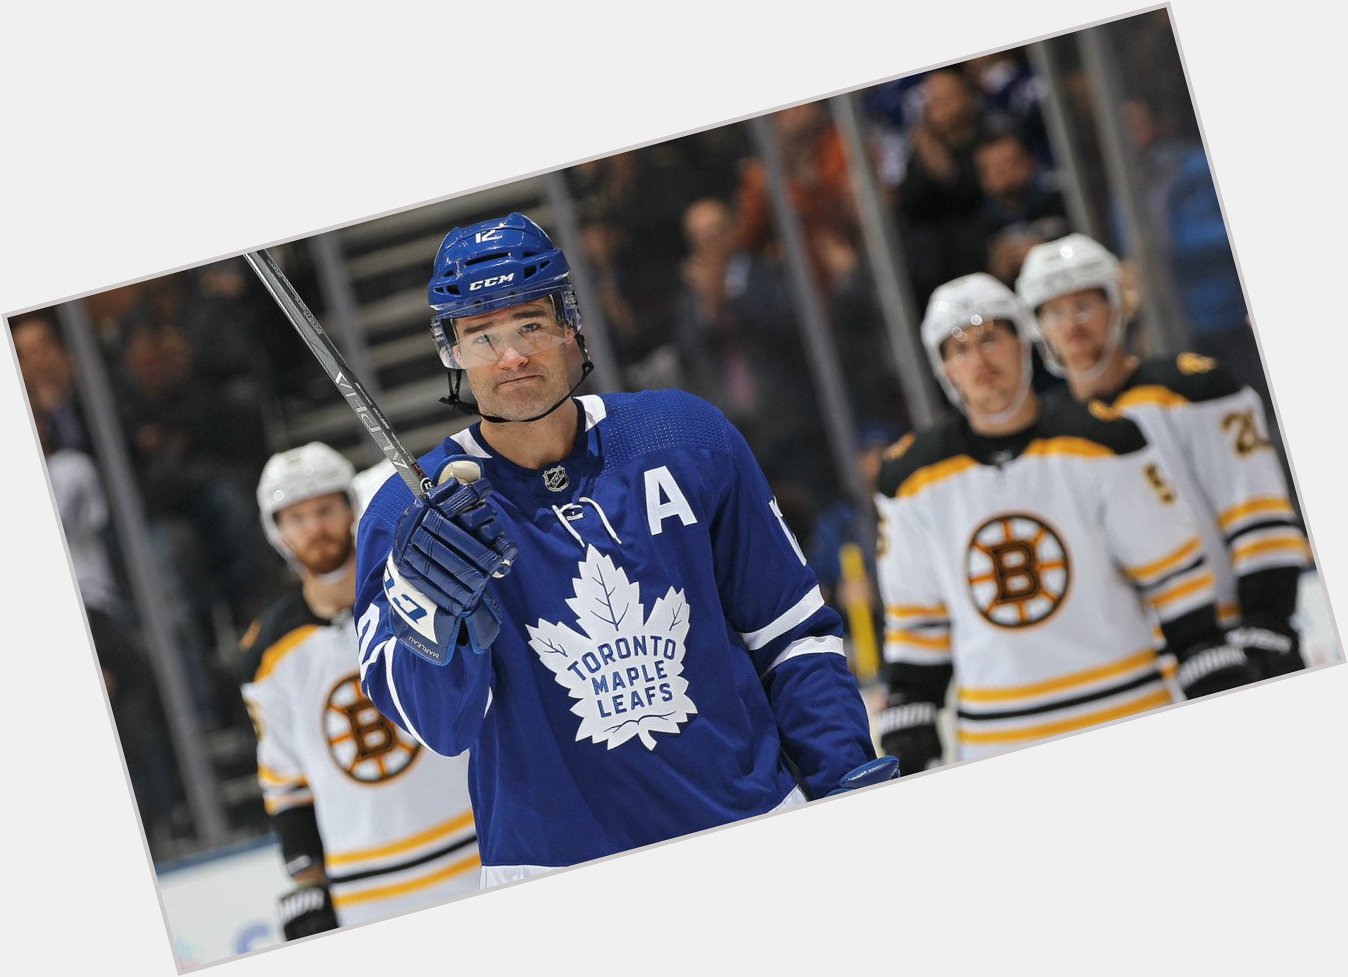 Happy 40th birthday to Patrick Marleau - two years a forward and a first-ballot Hall-of-Famer. 